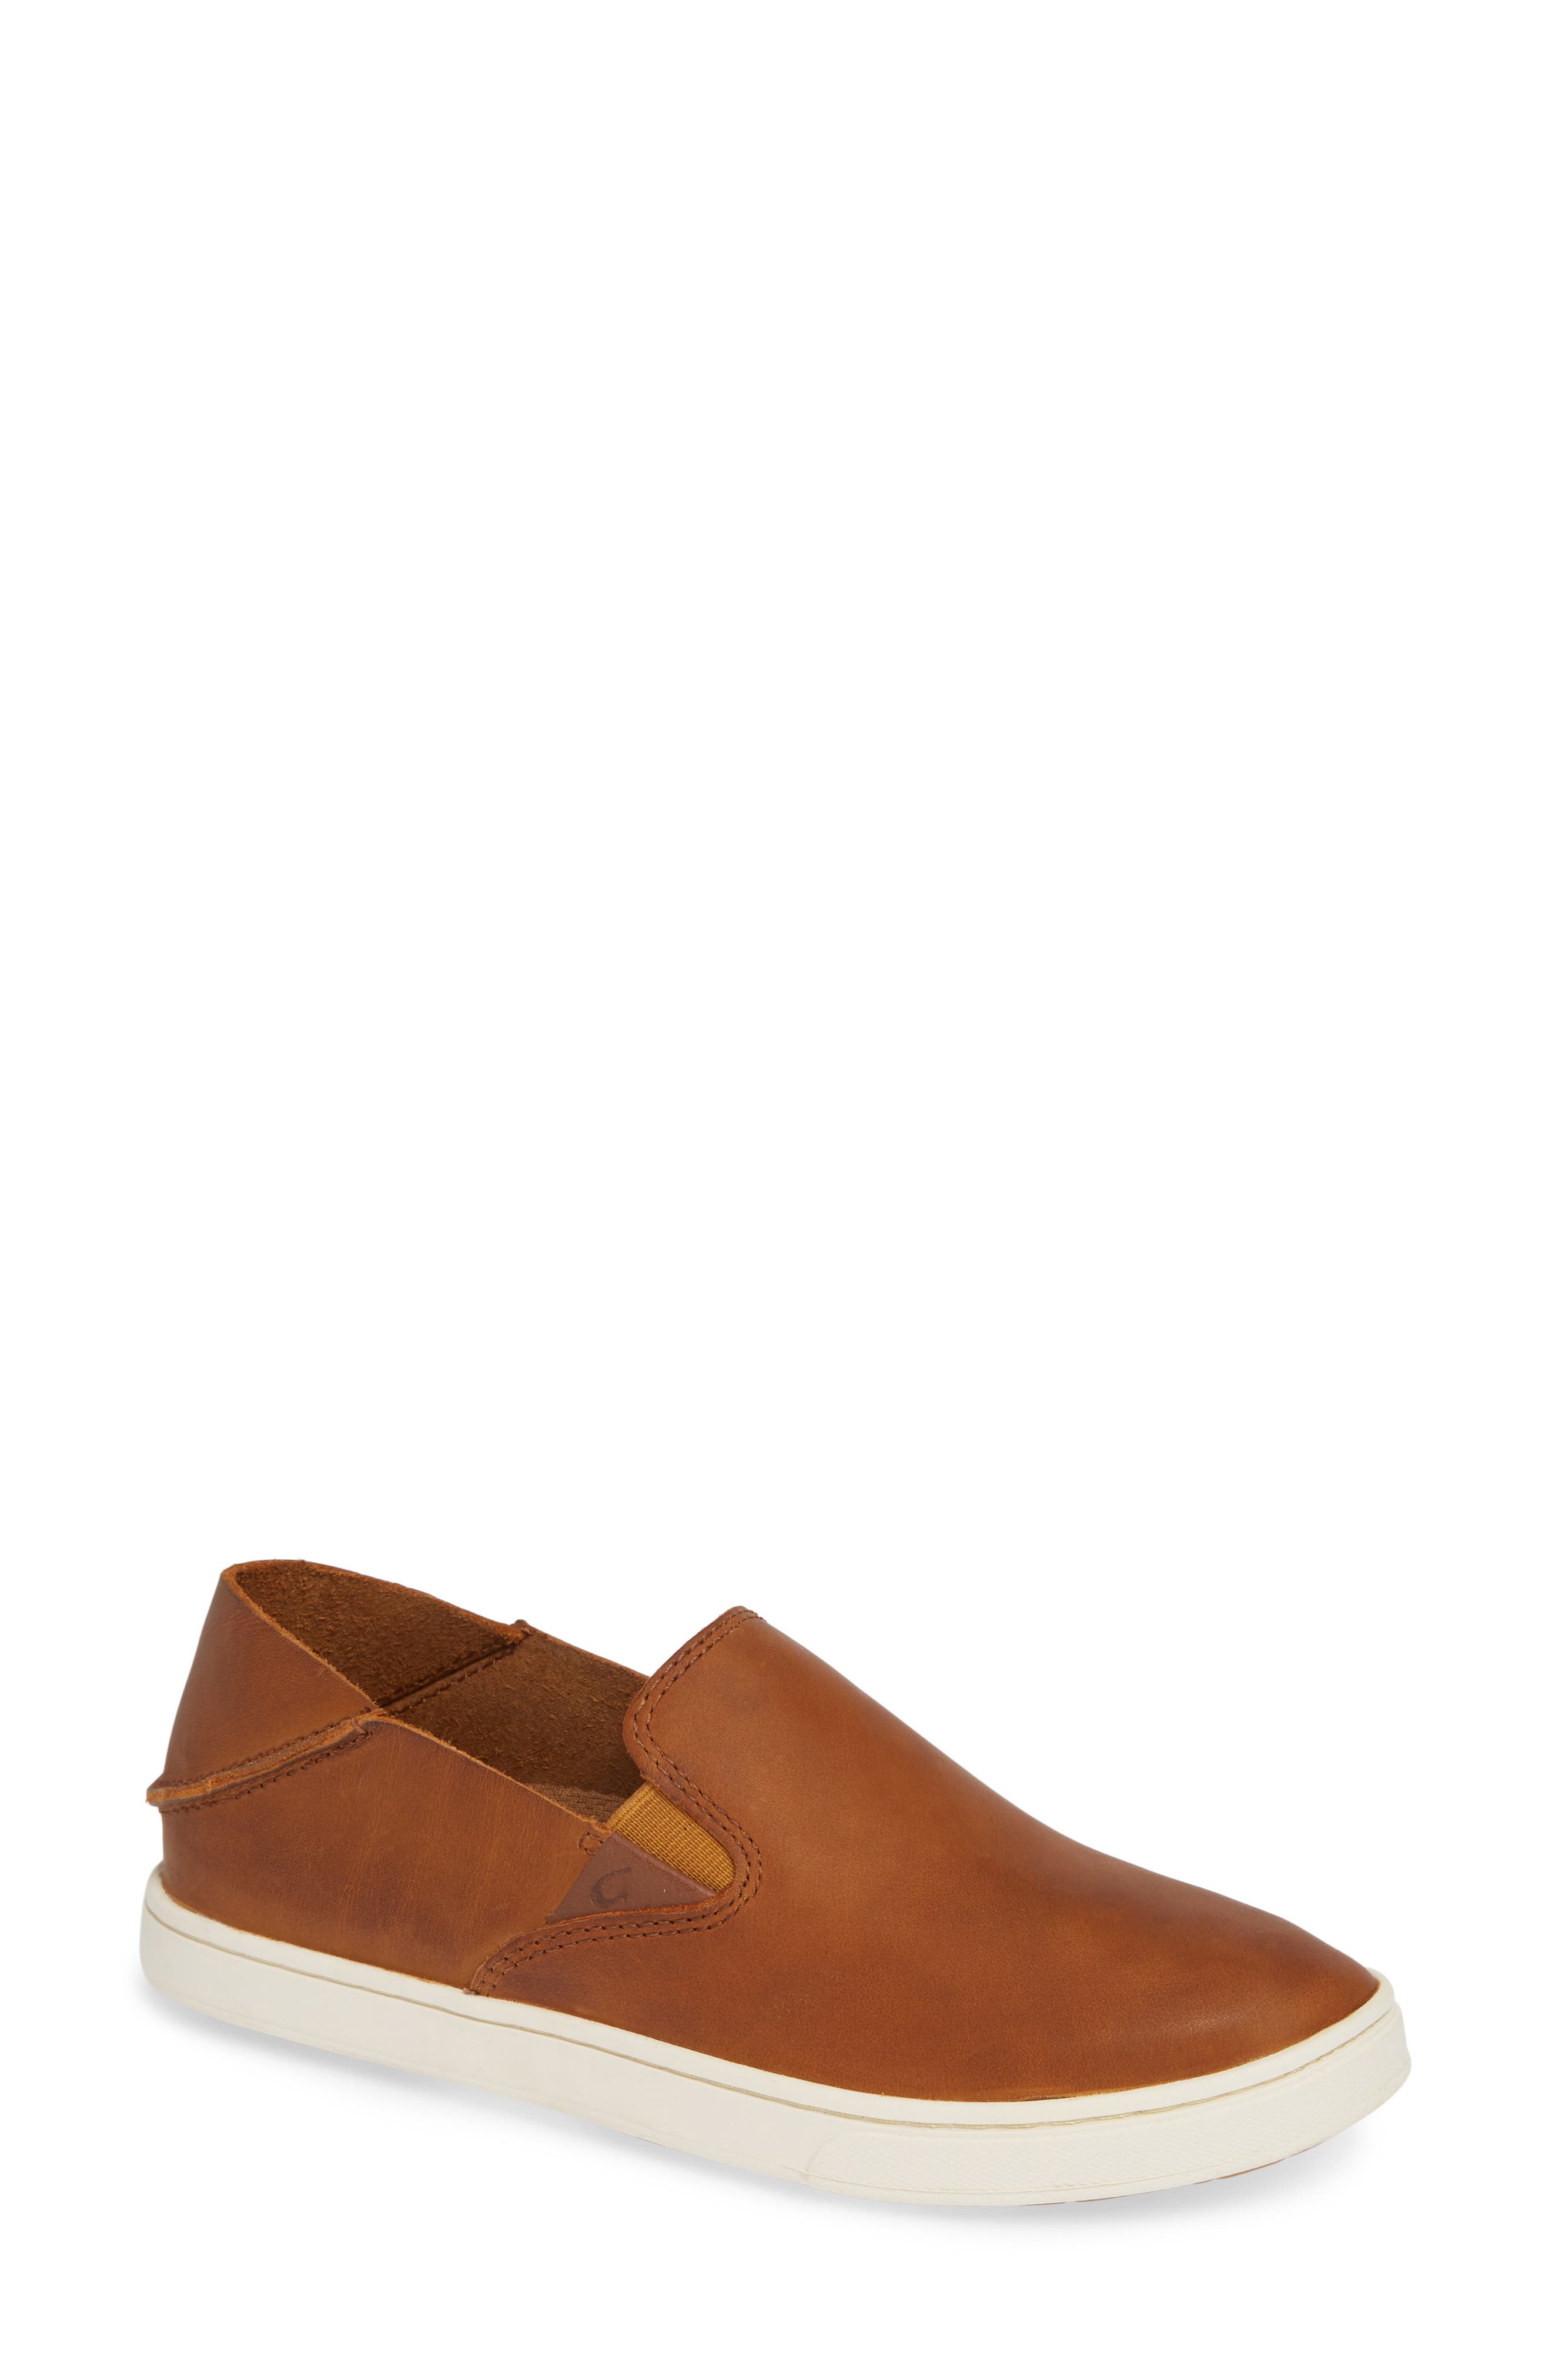 womens tan leather slip on sneakers